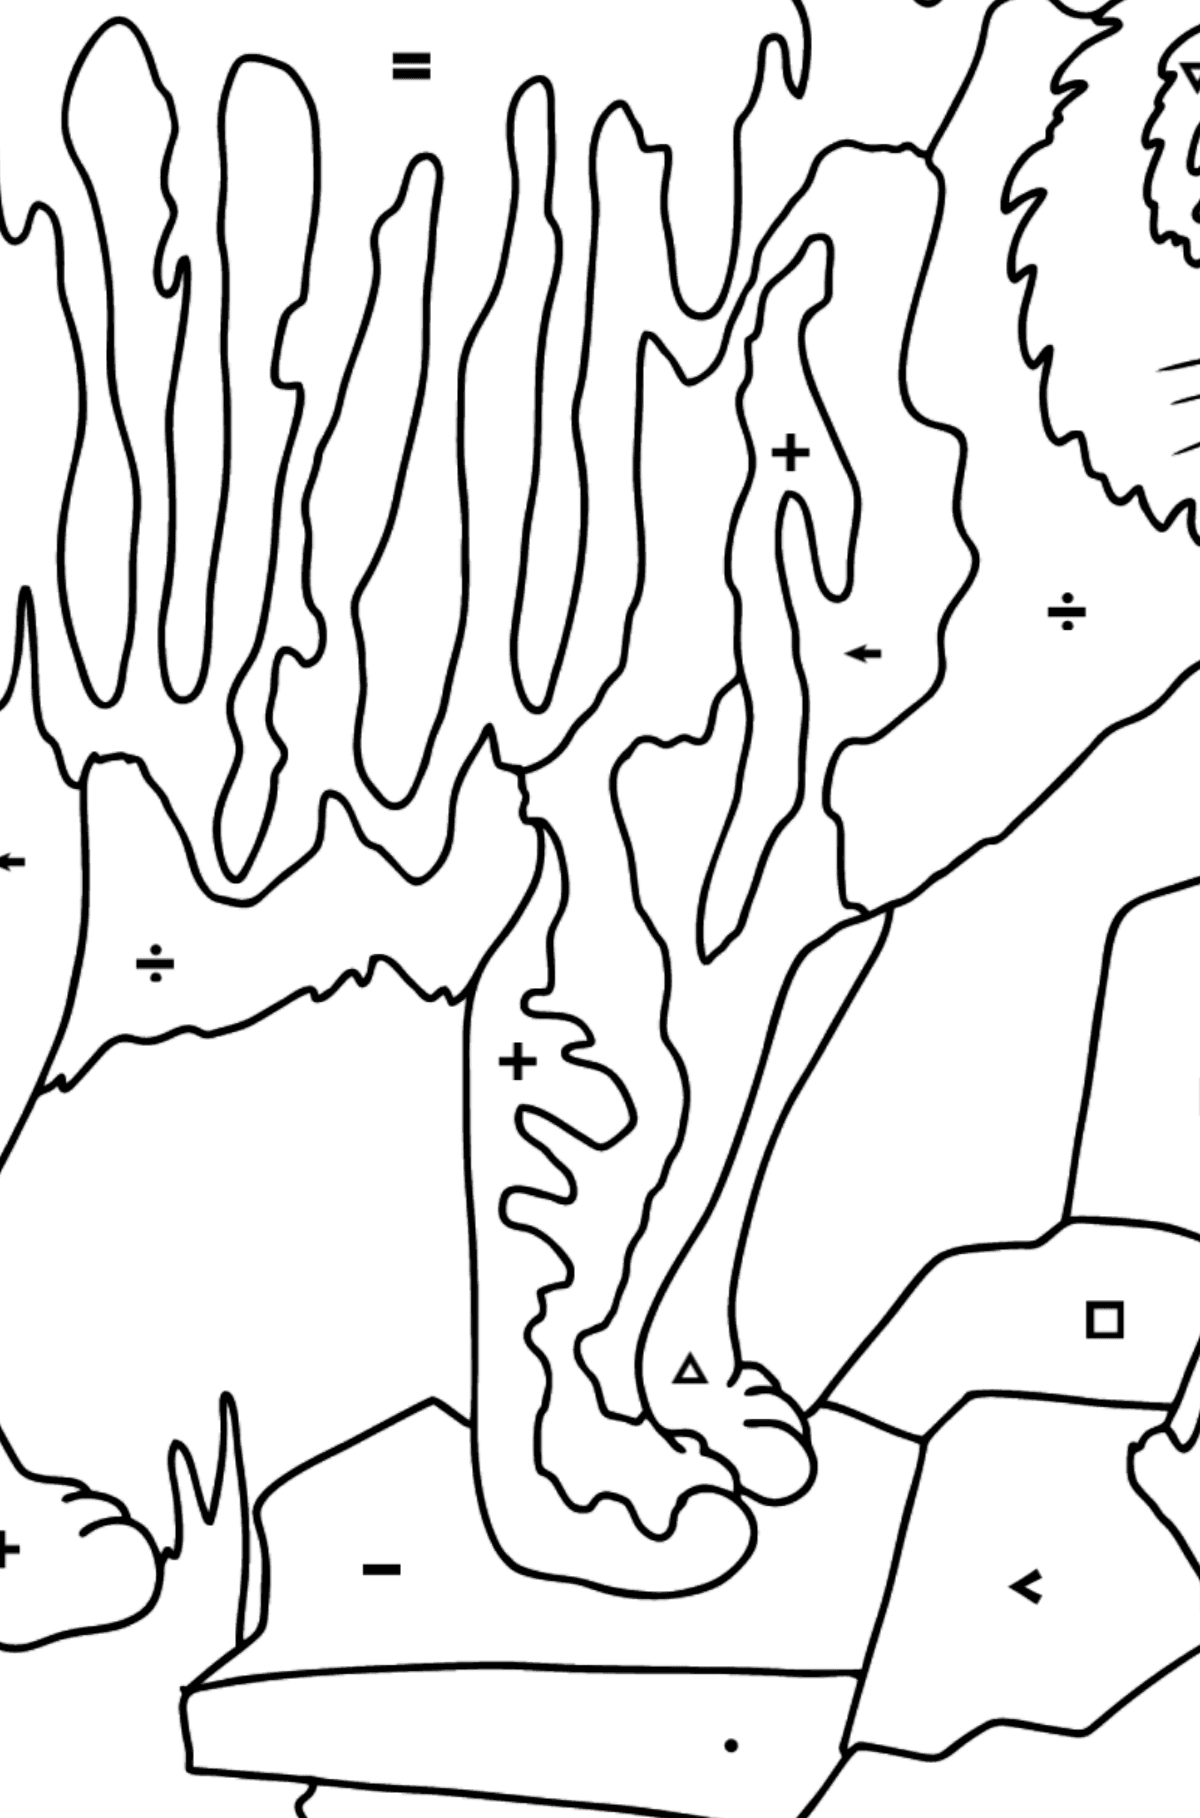 Complex Coloring Page - A Tiger is Looking for Prey - Coloring by Symbols for Kids